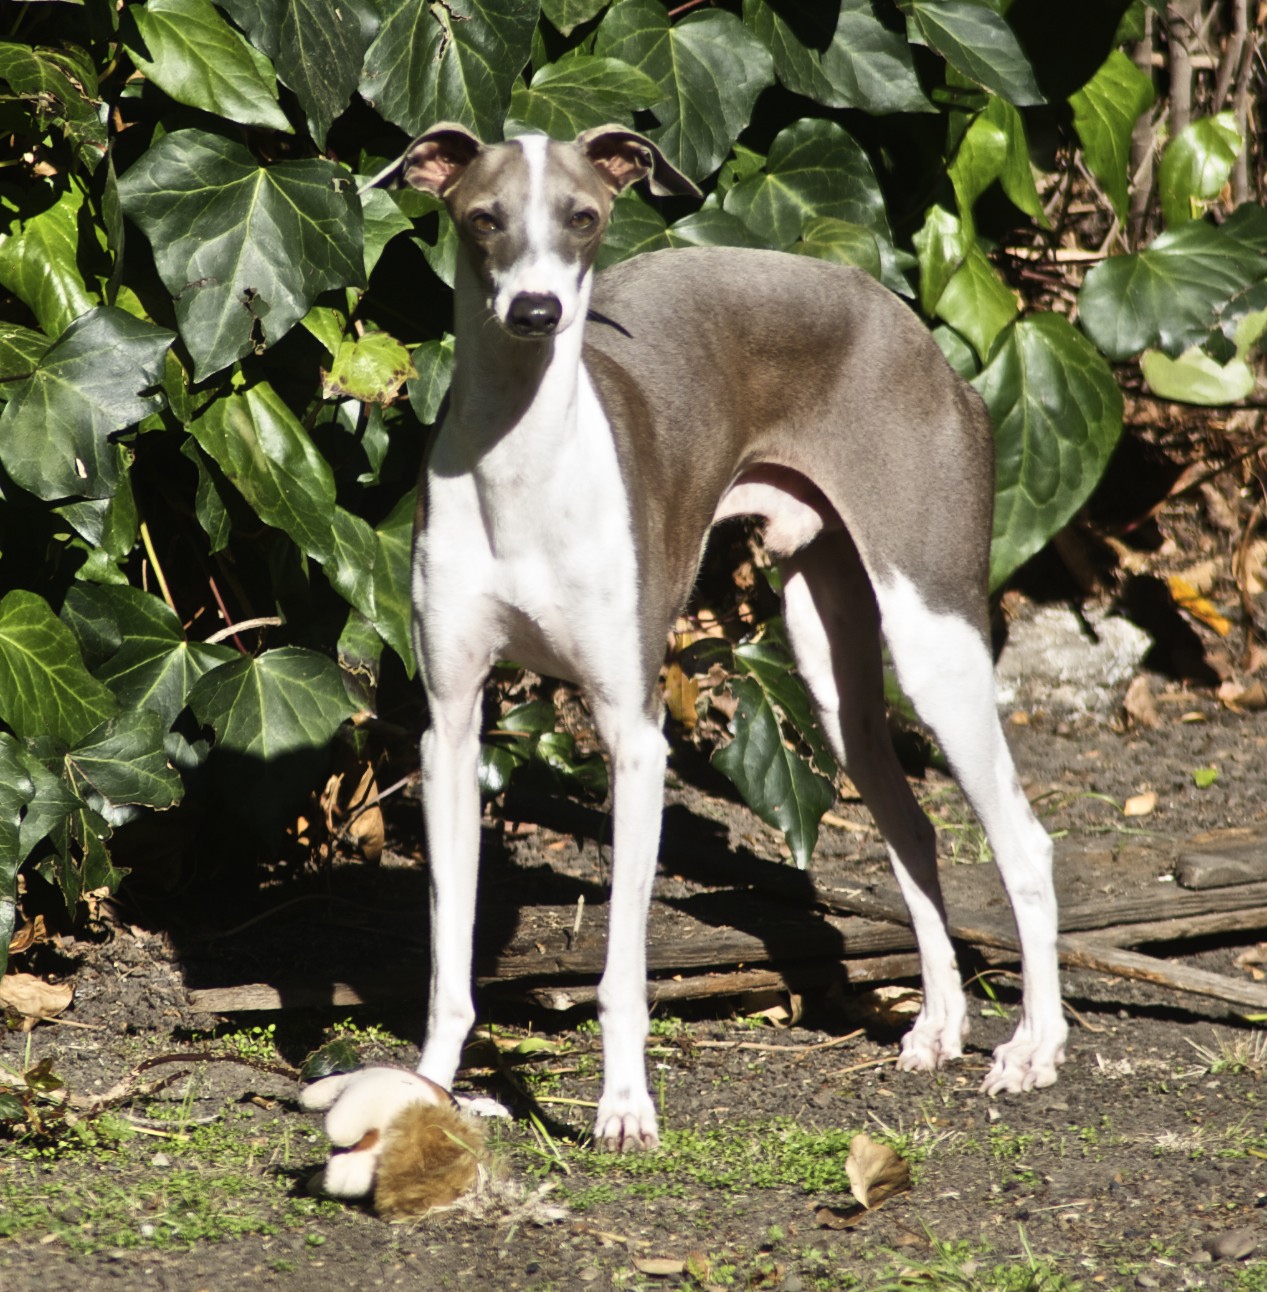 a grey and white dog standing by plants and rocks